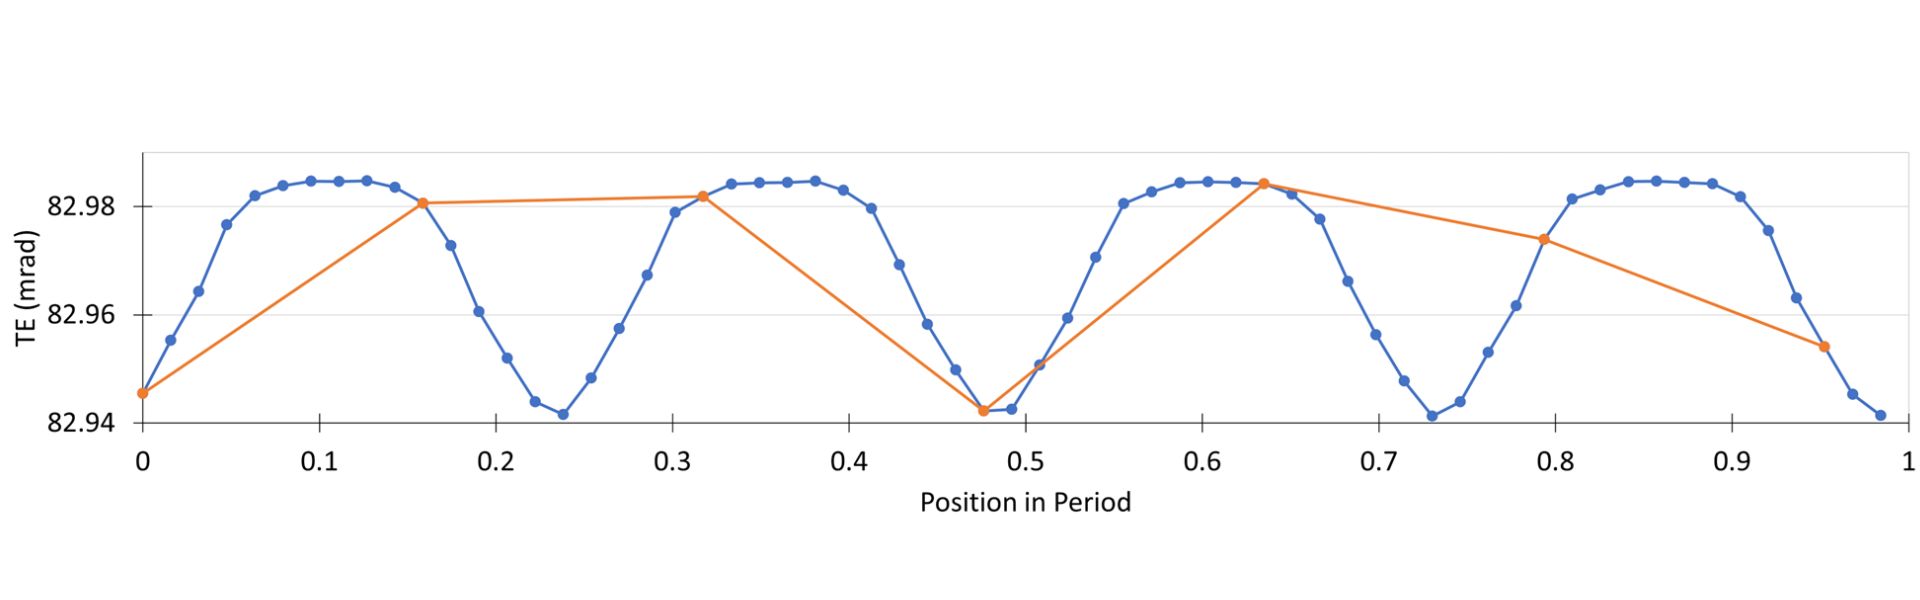 Under sampled signal example. TE (mrad), Position in Period.